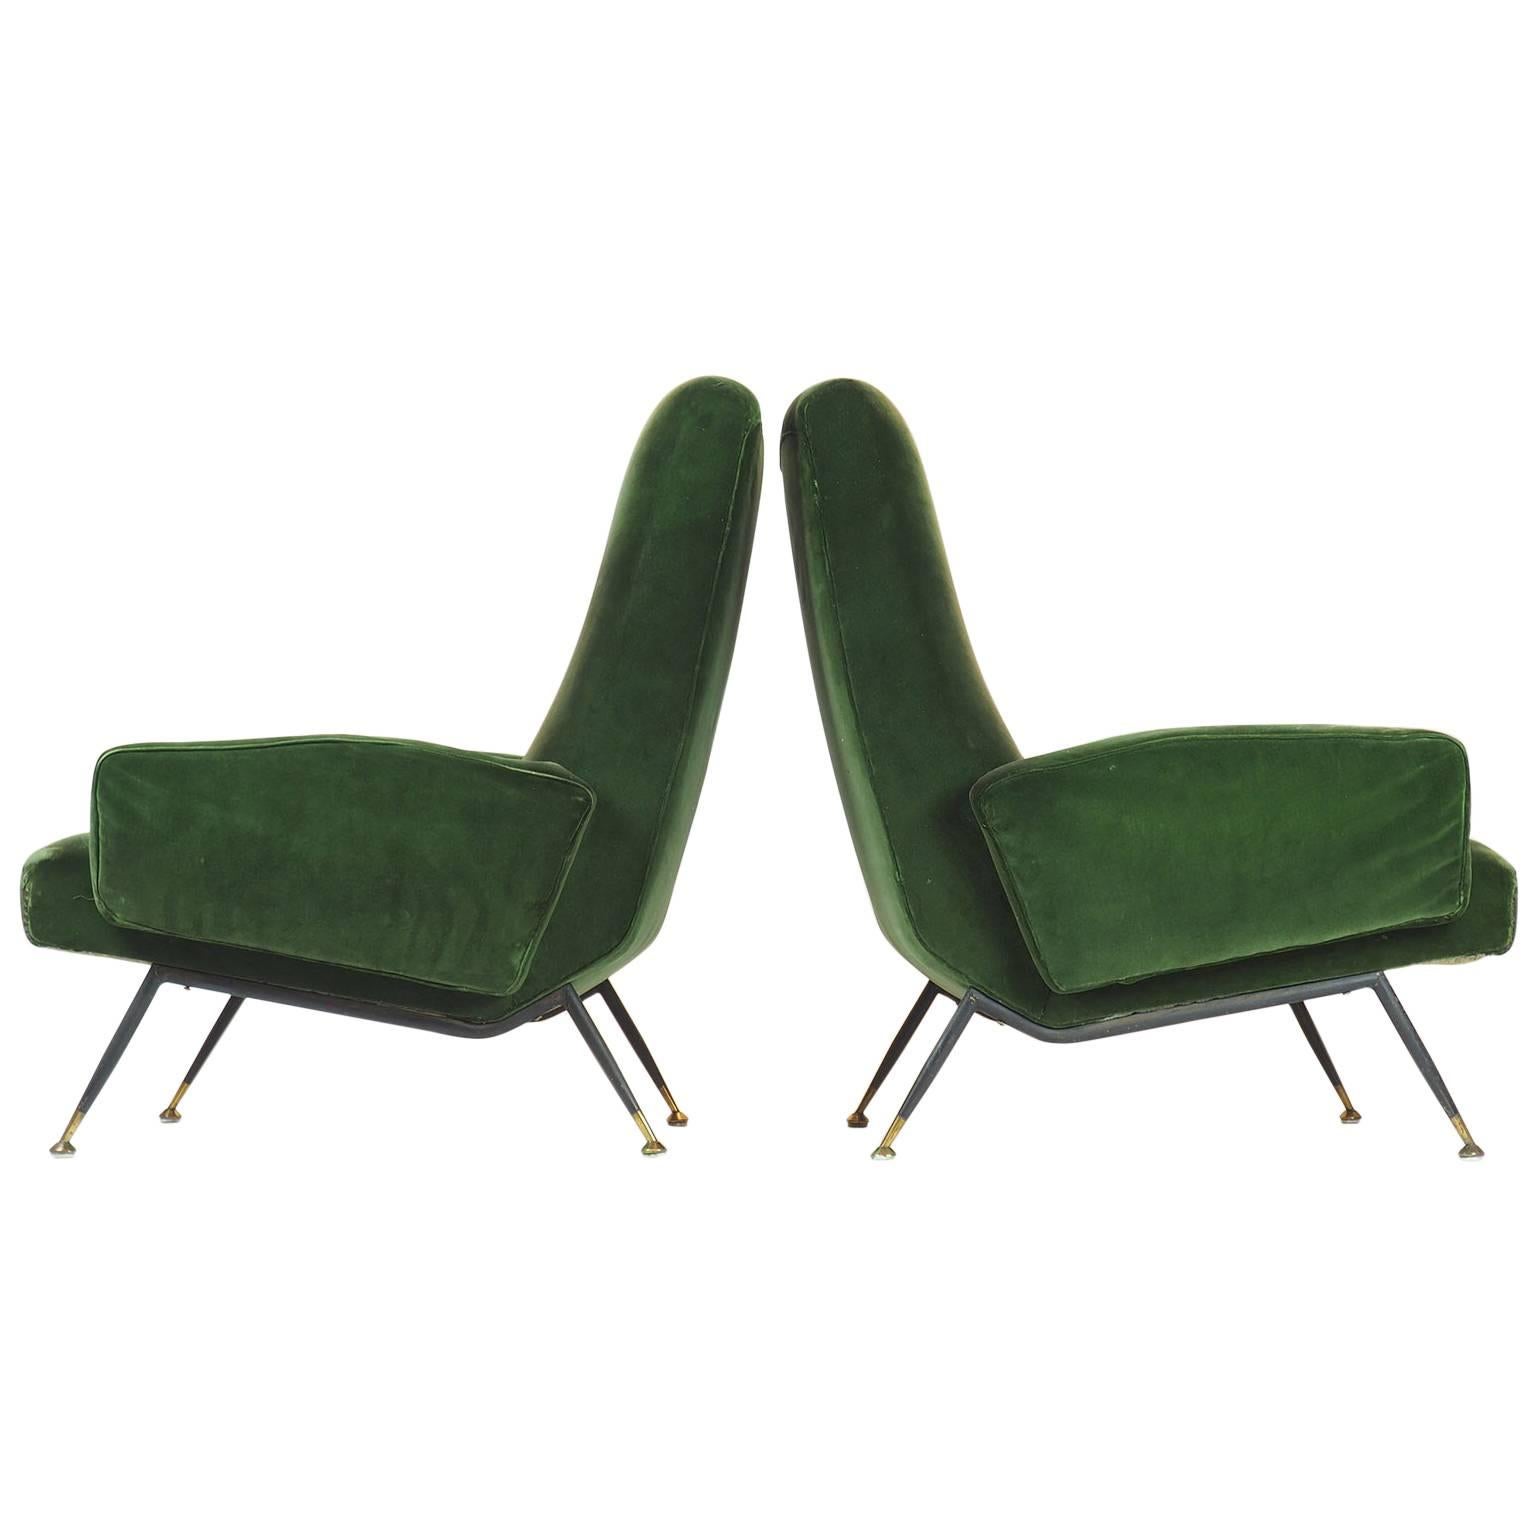 Italian Armchairs, Comfort with Unusual and Unconventional Lines, Milano, 1950s